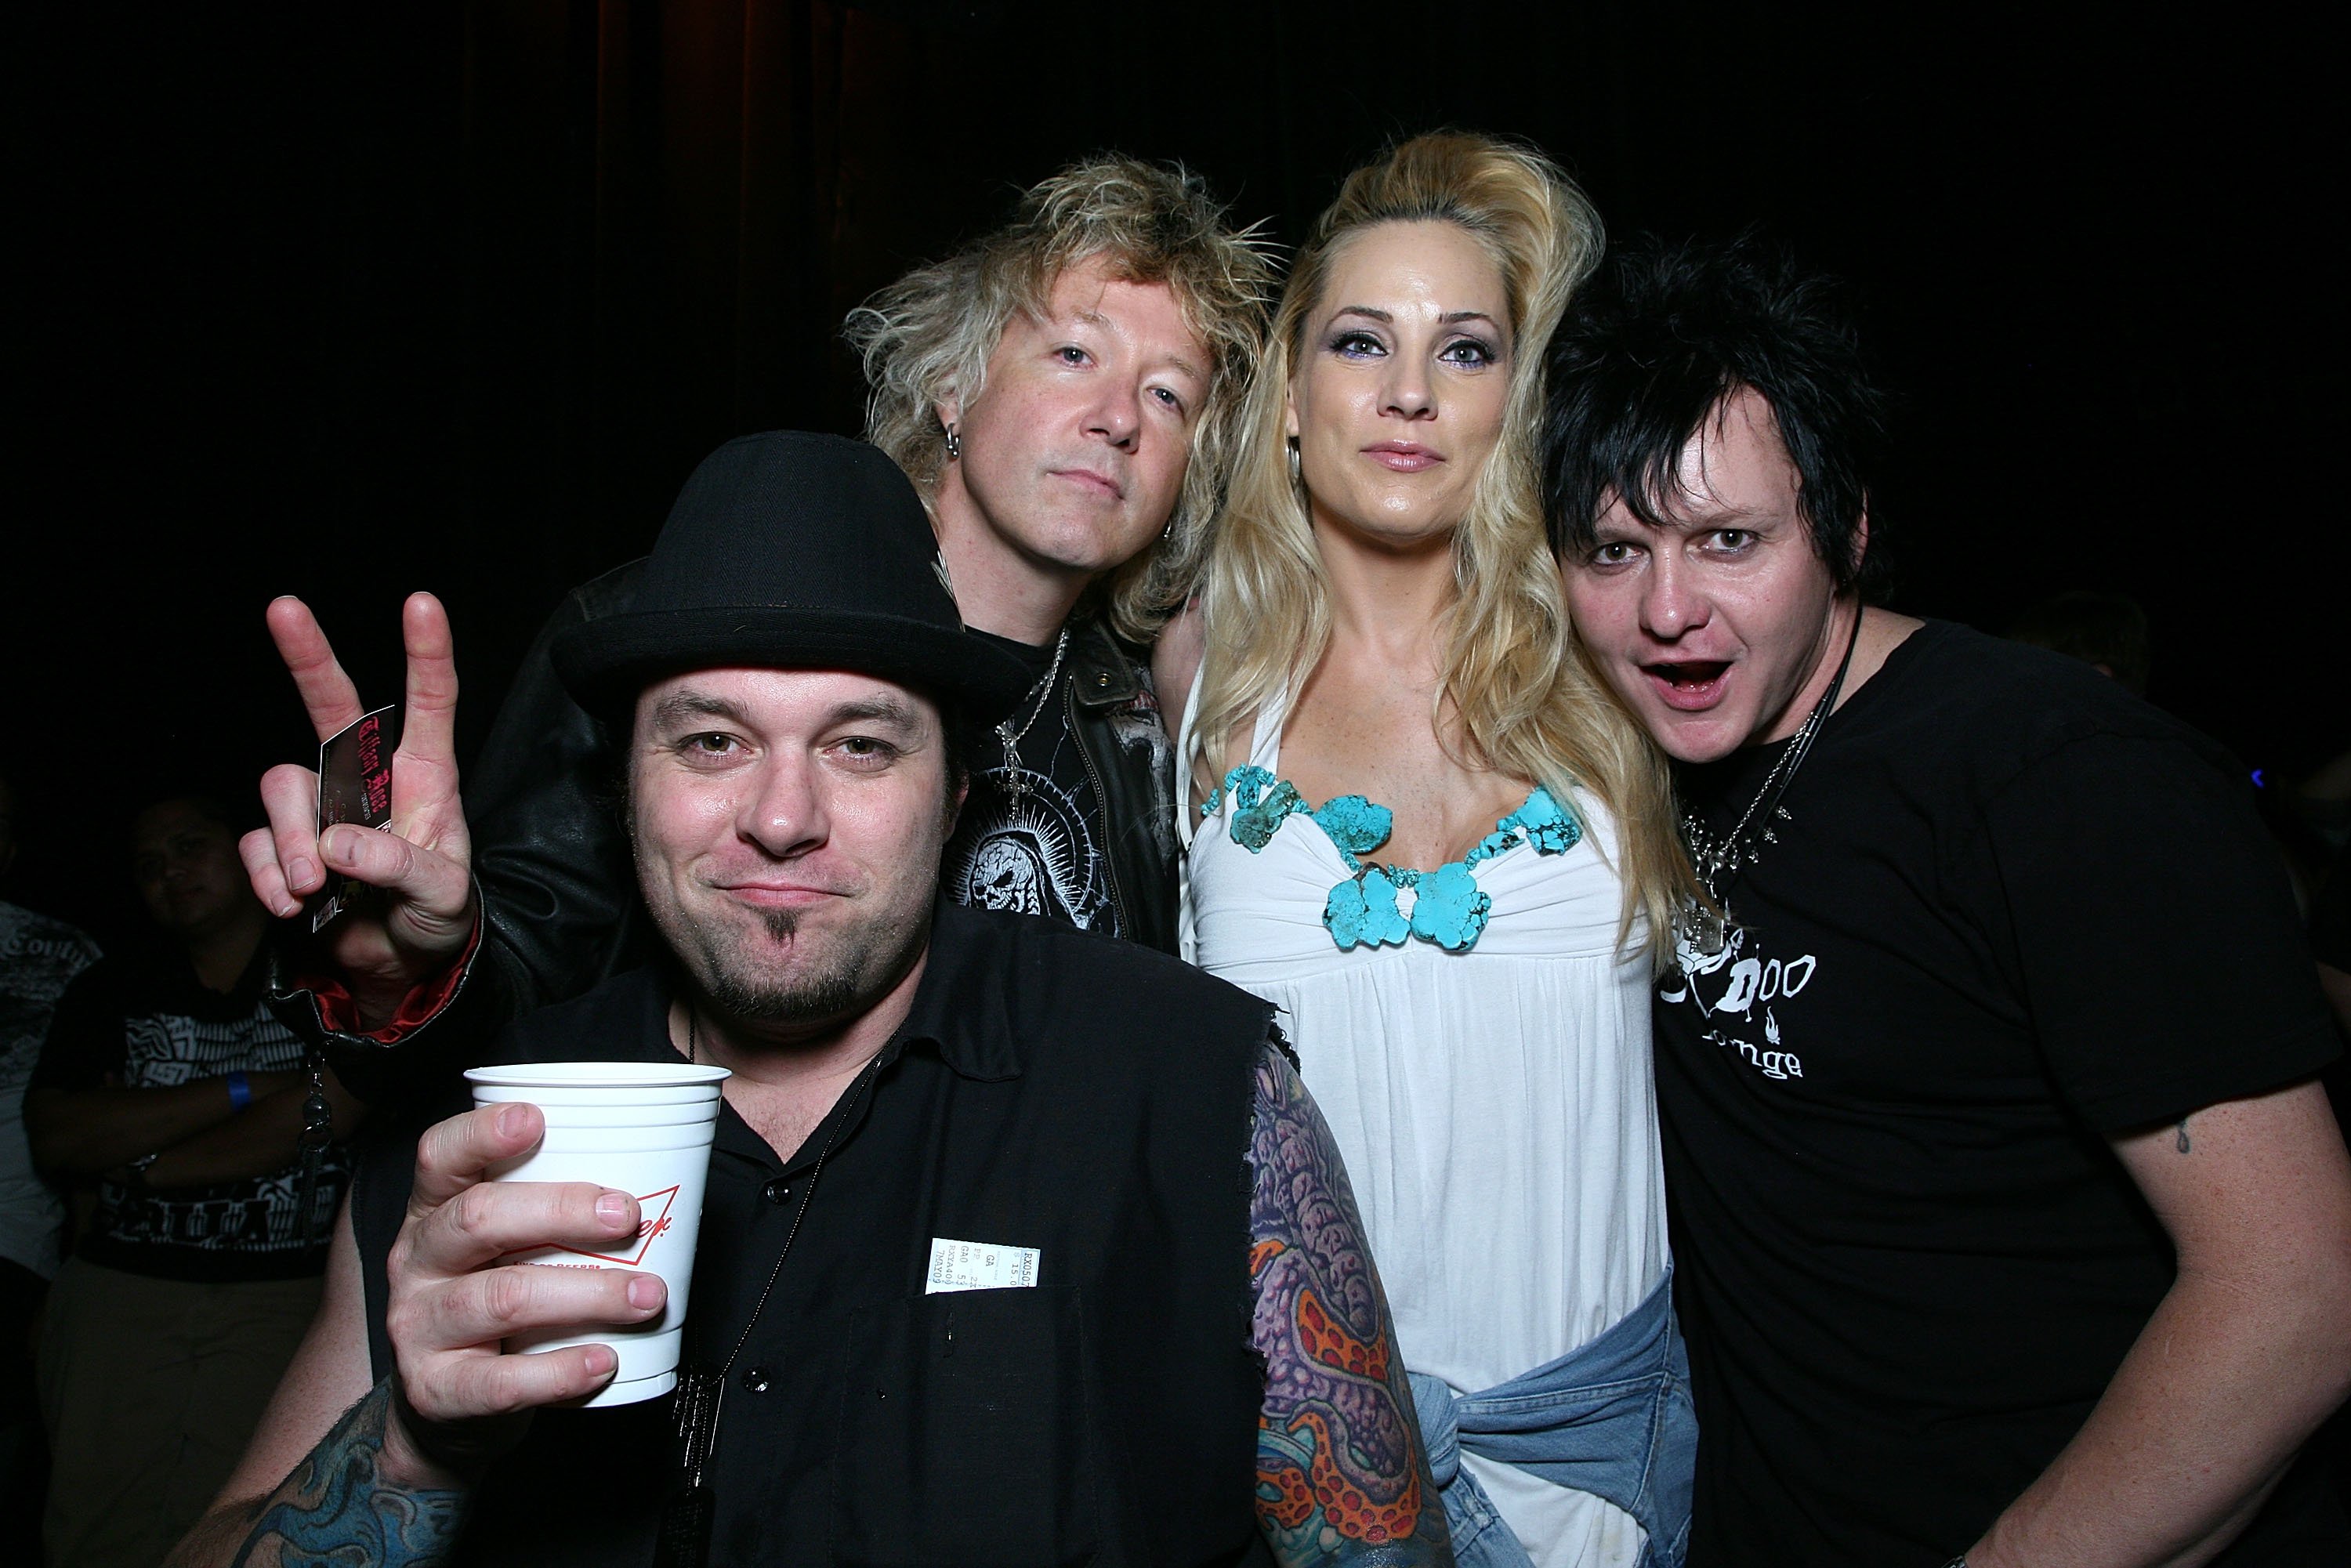 Athena Lee and other members of "Krunk" pose for a picture at the Chelsea Girls in California in 2009 | Source: Getty Images 